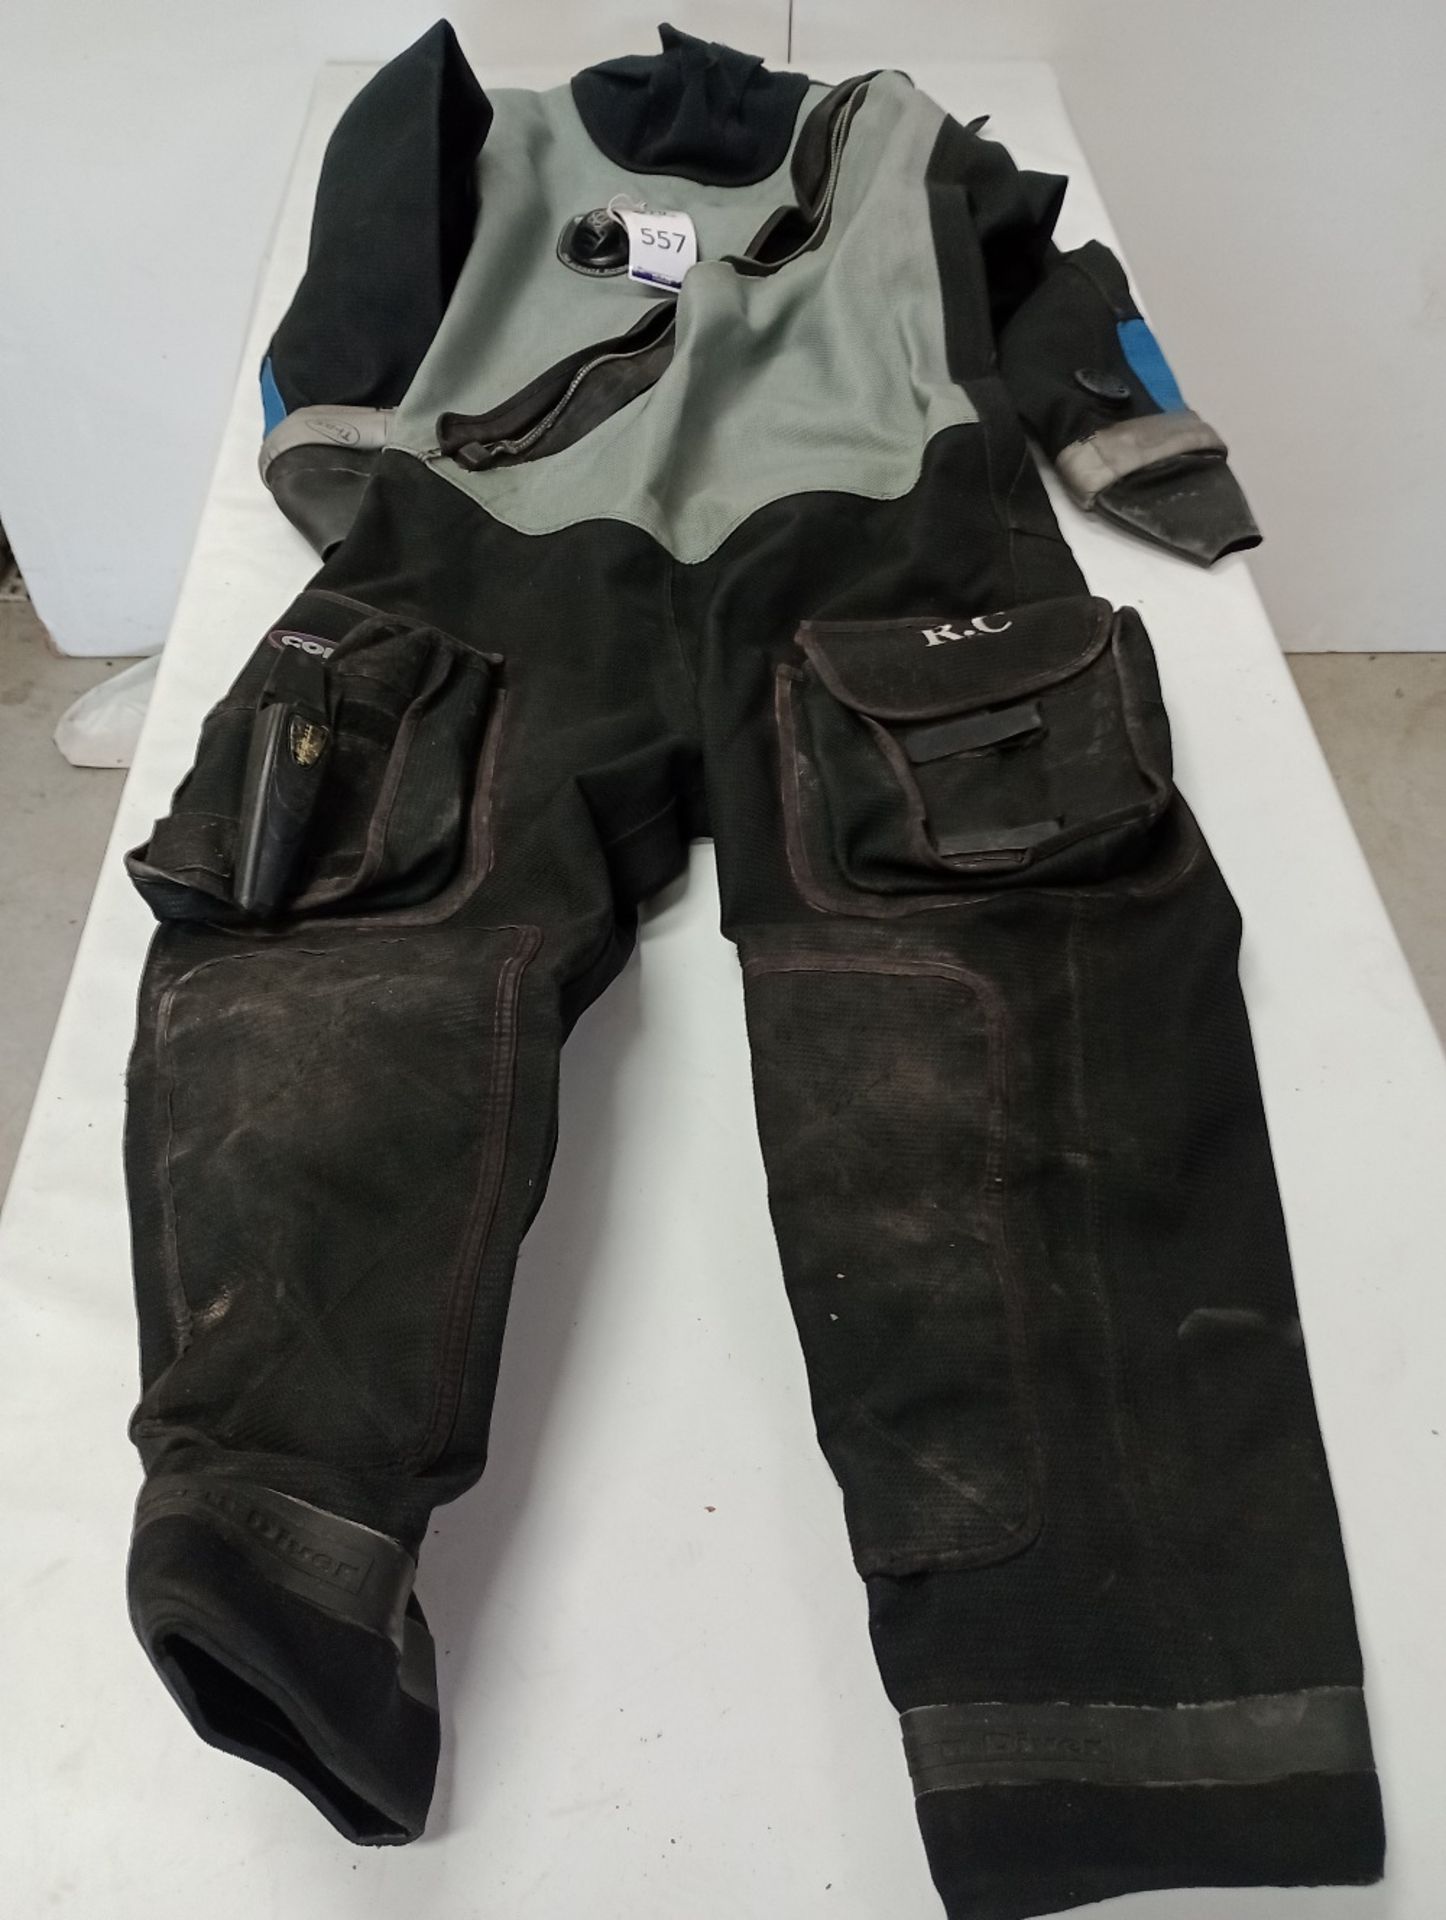 Northern Diver Cortex Drysuit, Ref No. 0001-4368 (Location: Brentwood. Please Refer to General